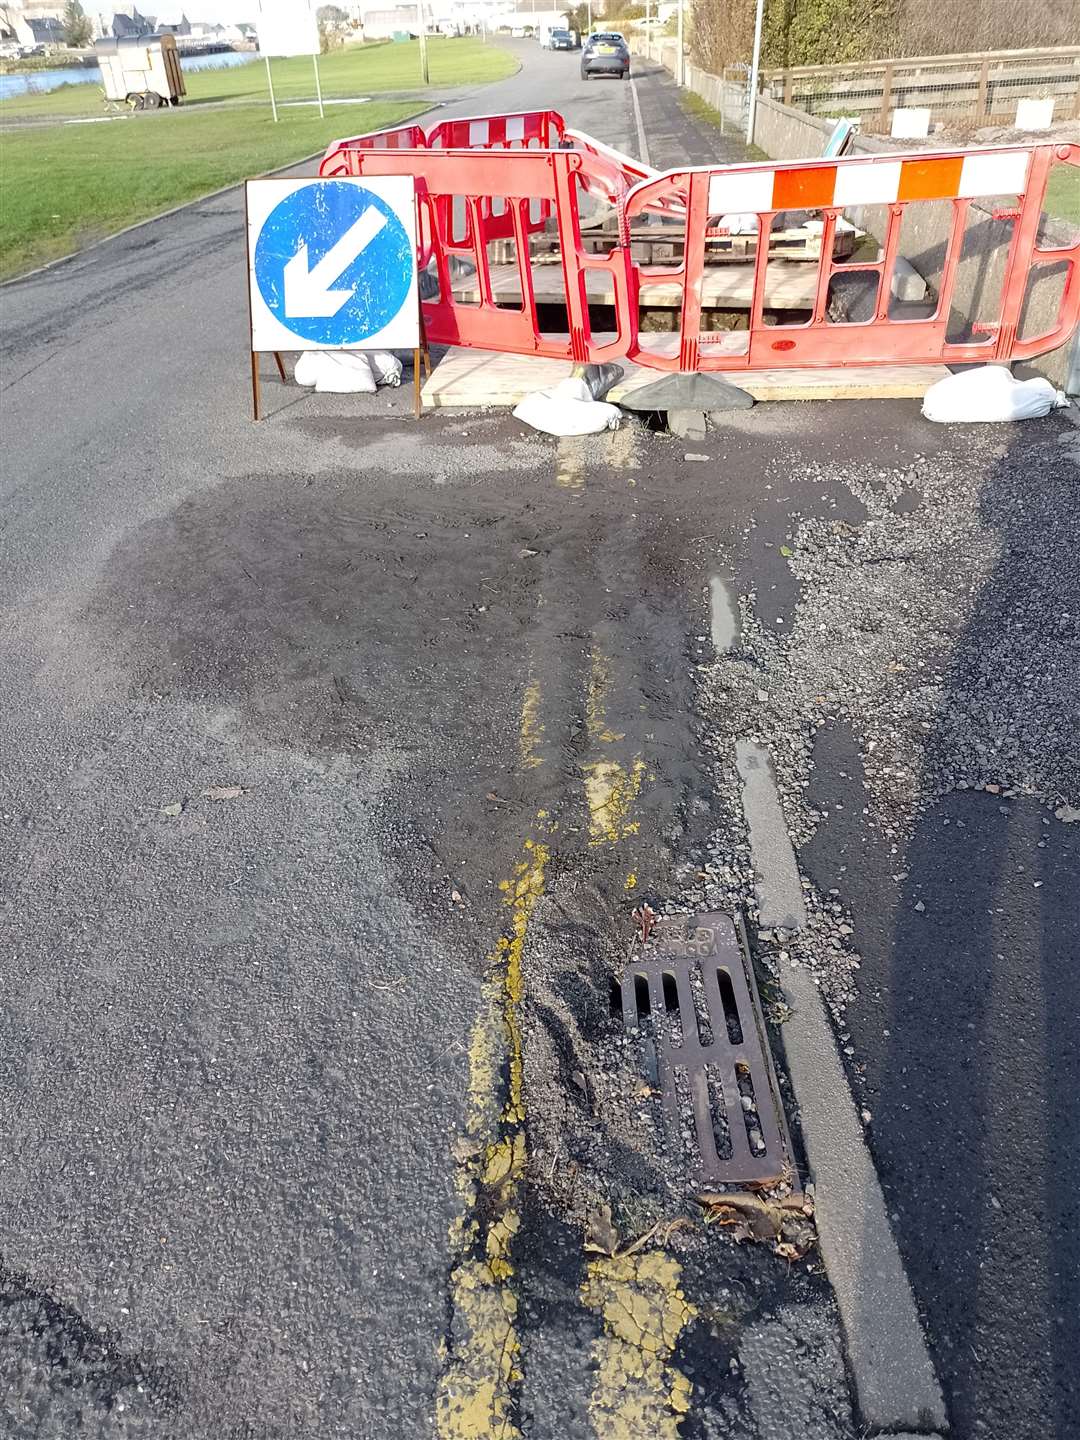 The pavement is blocked and missing where the original hole has been excavated.